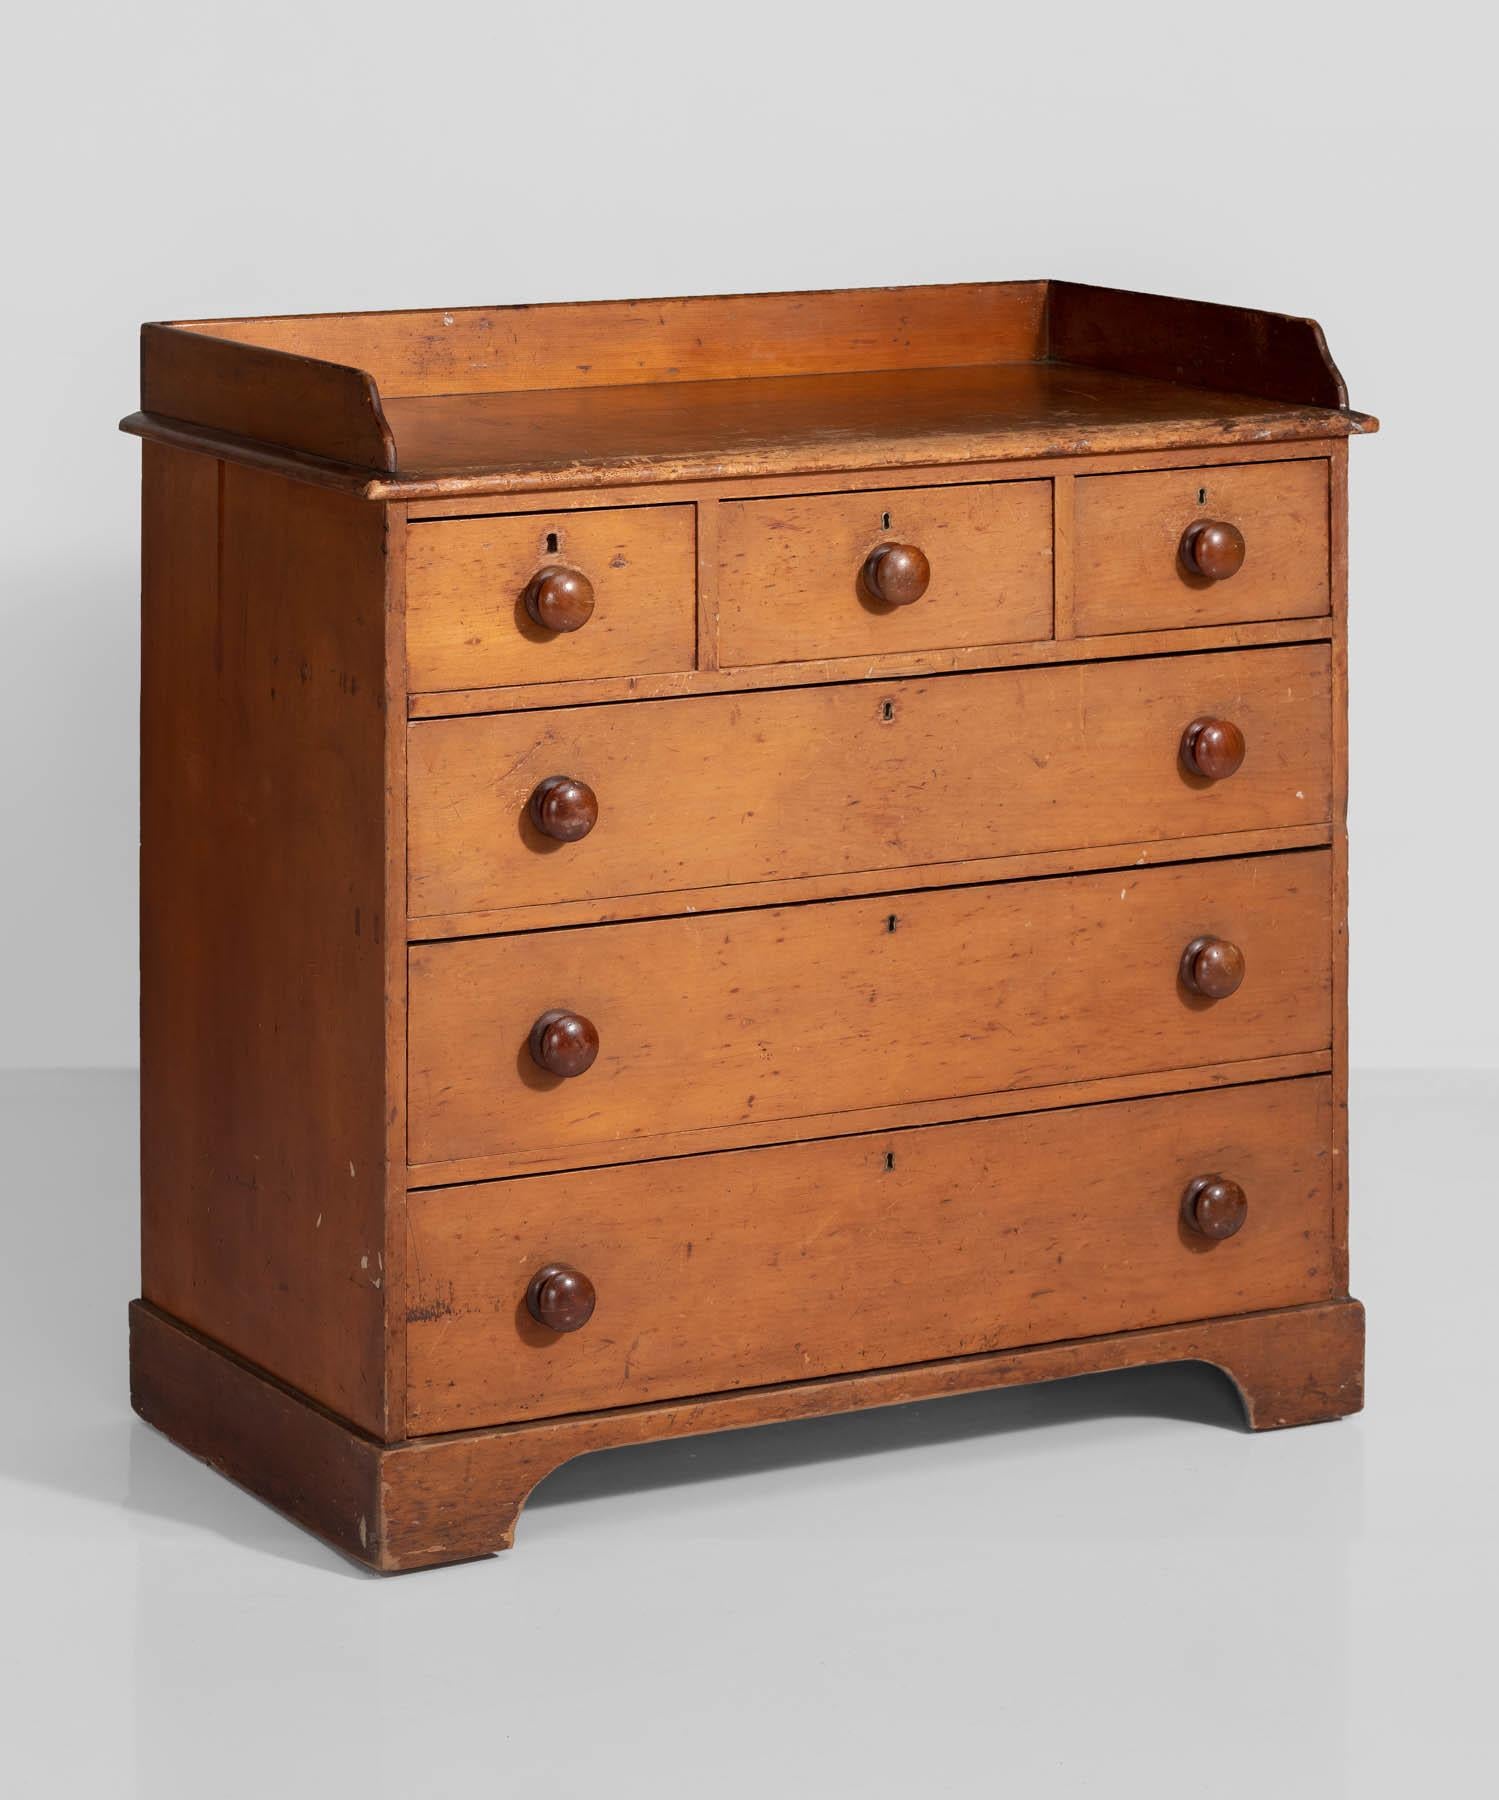 Pine chest of drawers, England, circa 1890.

Simple, minimal form with oversized circular pulls.

Measures: 42.5